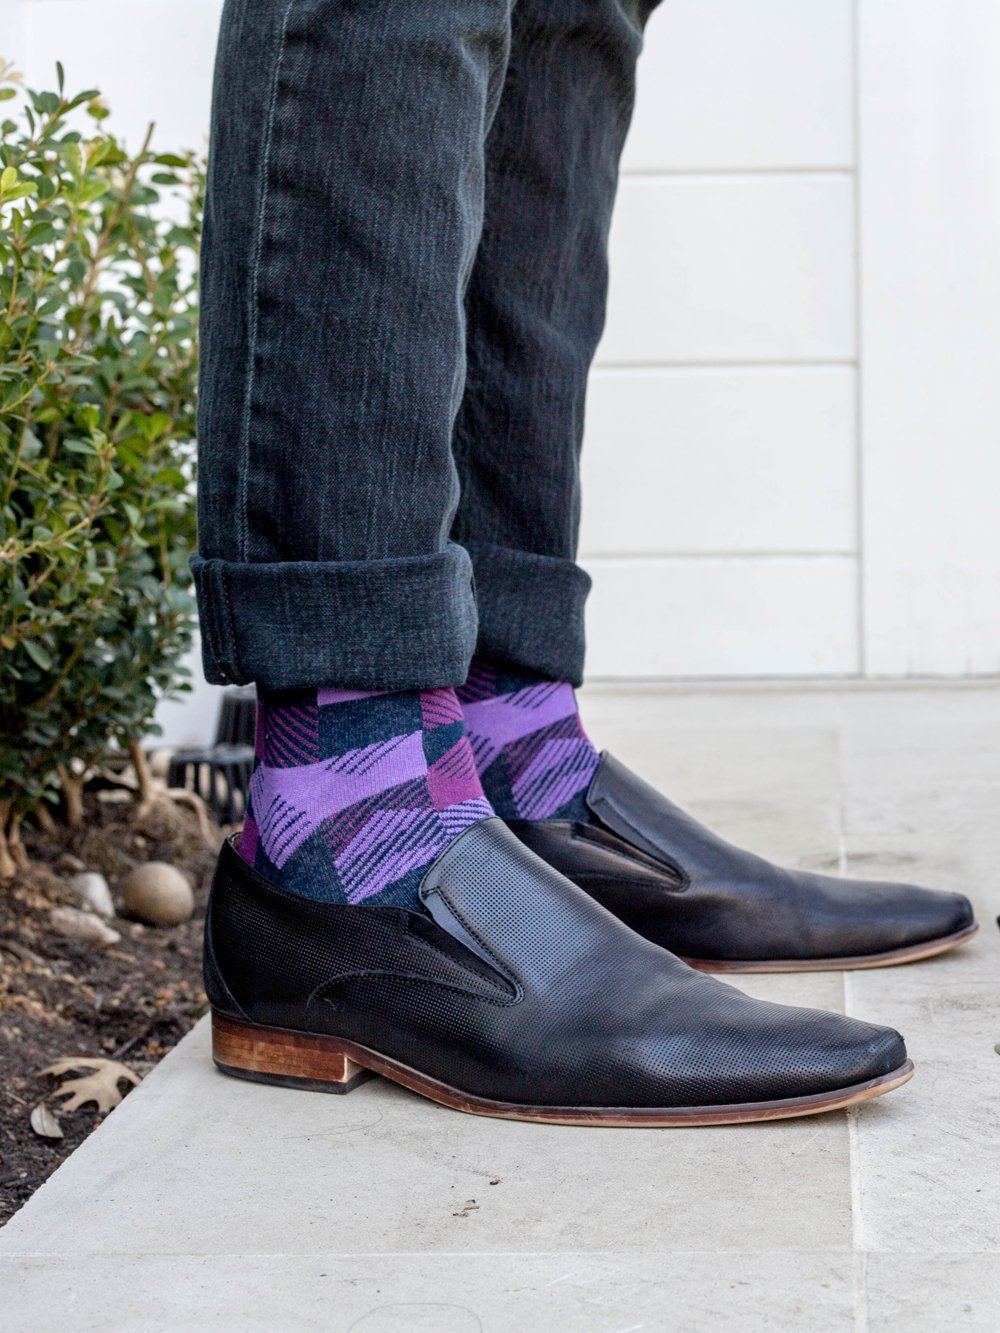 The Thisbe - Purple - Sock Club Store